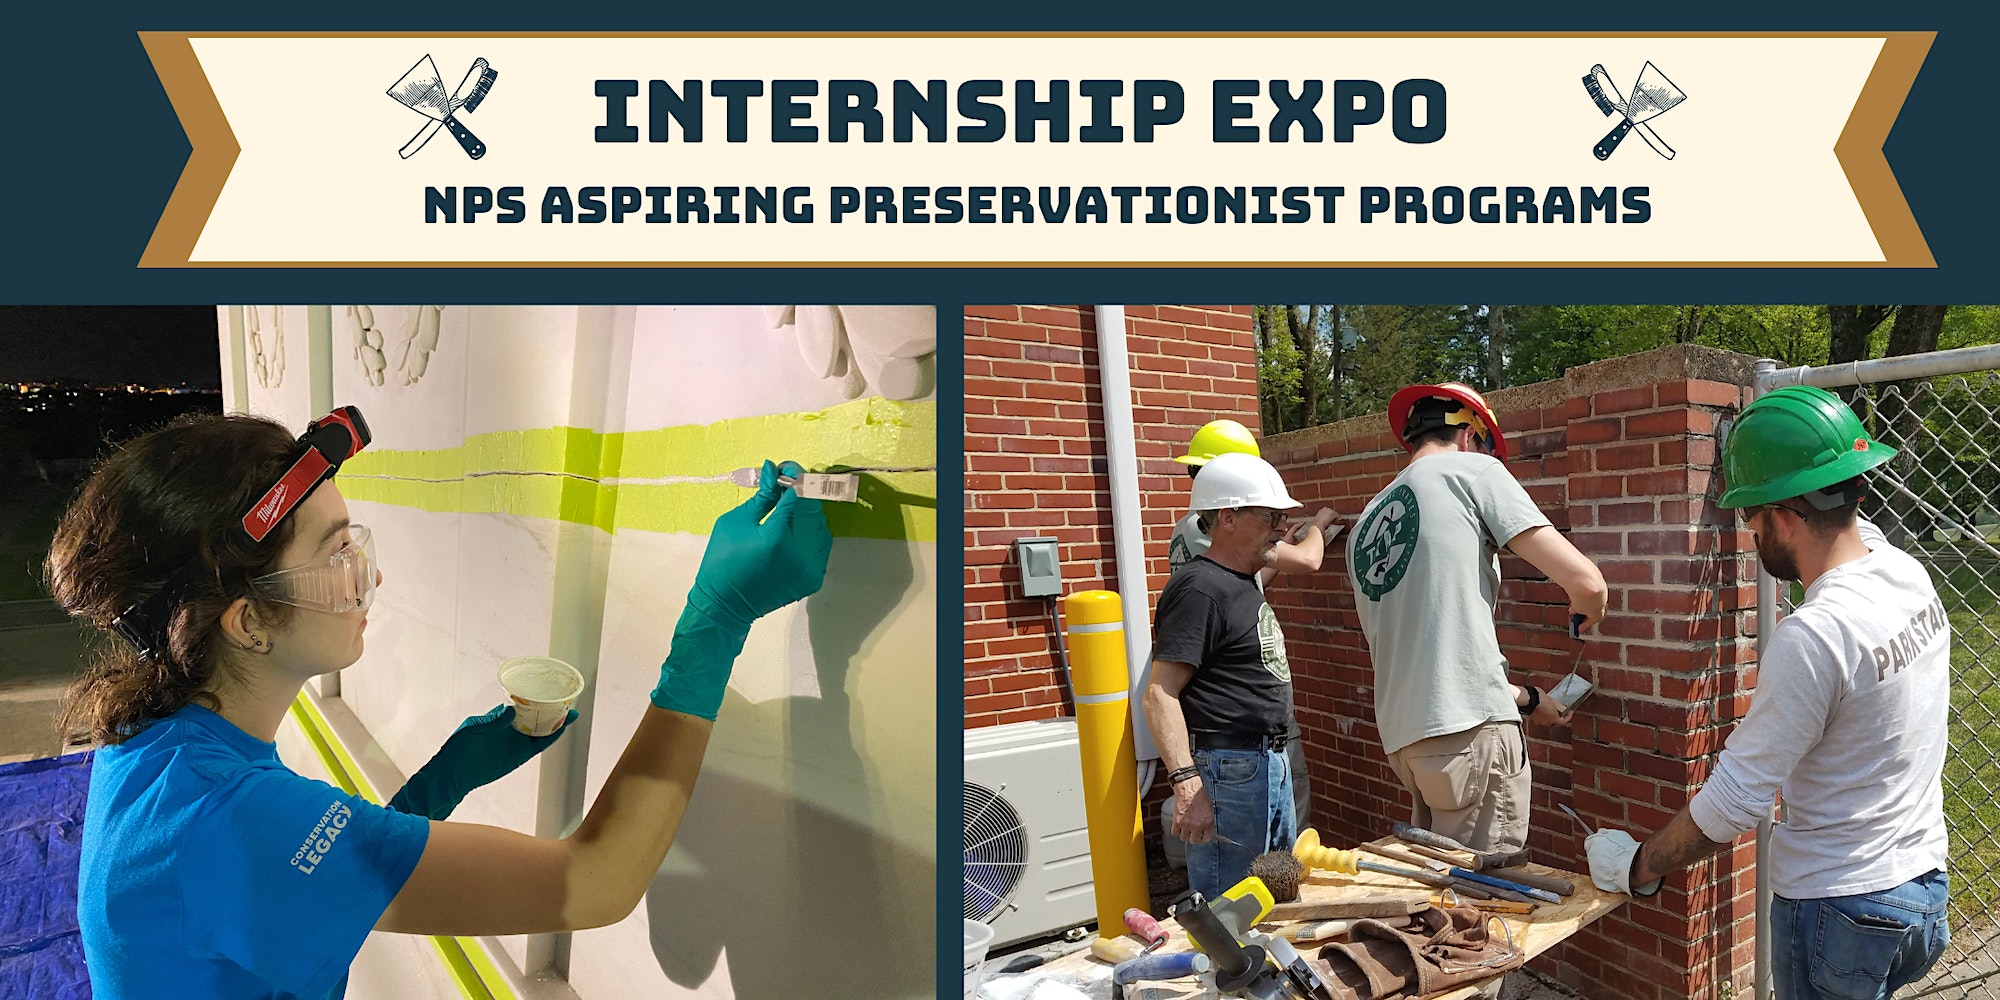 NPS Internship Expo advertisement featuring 4 masons in action.